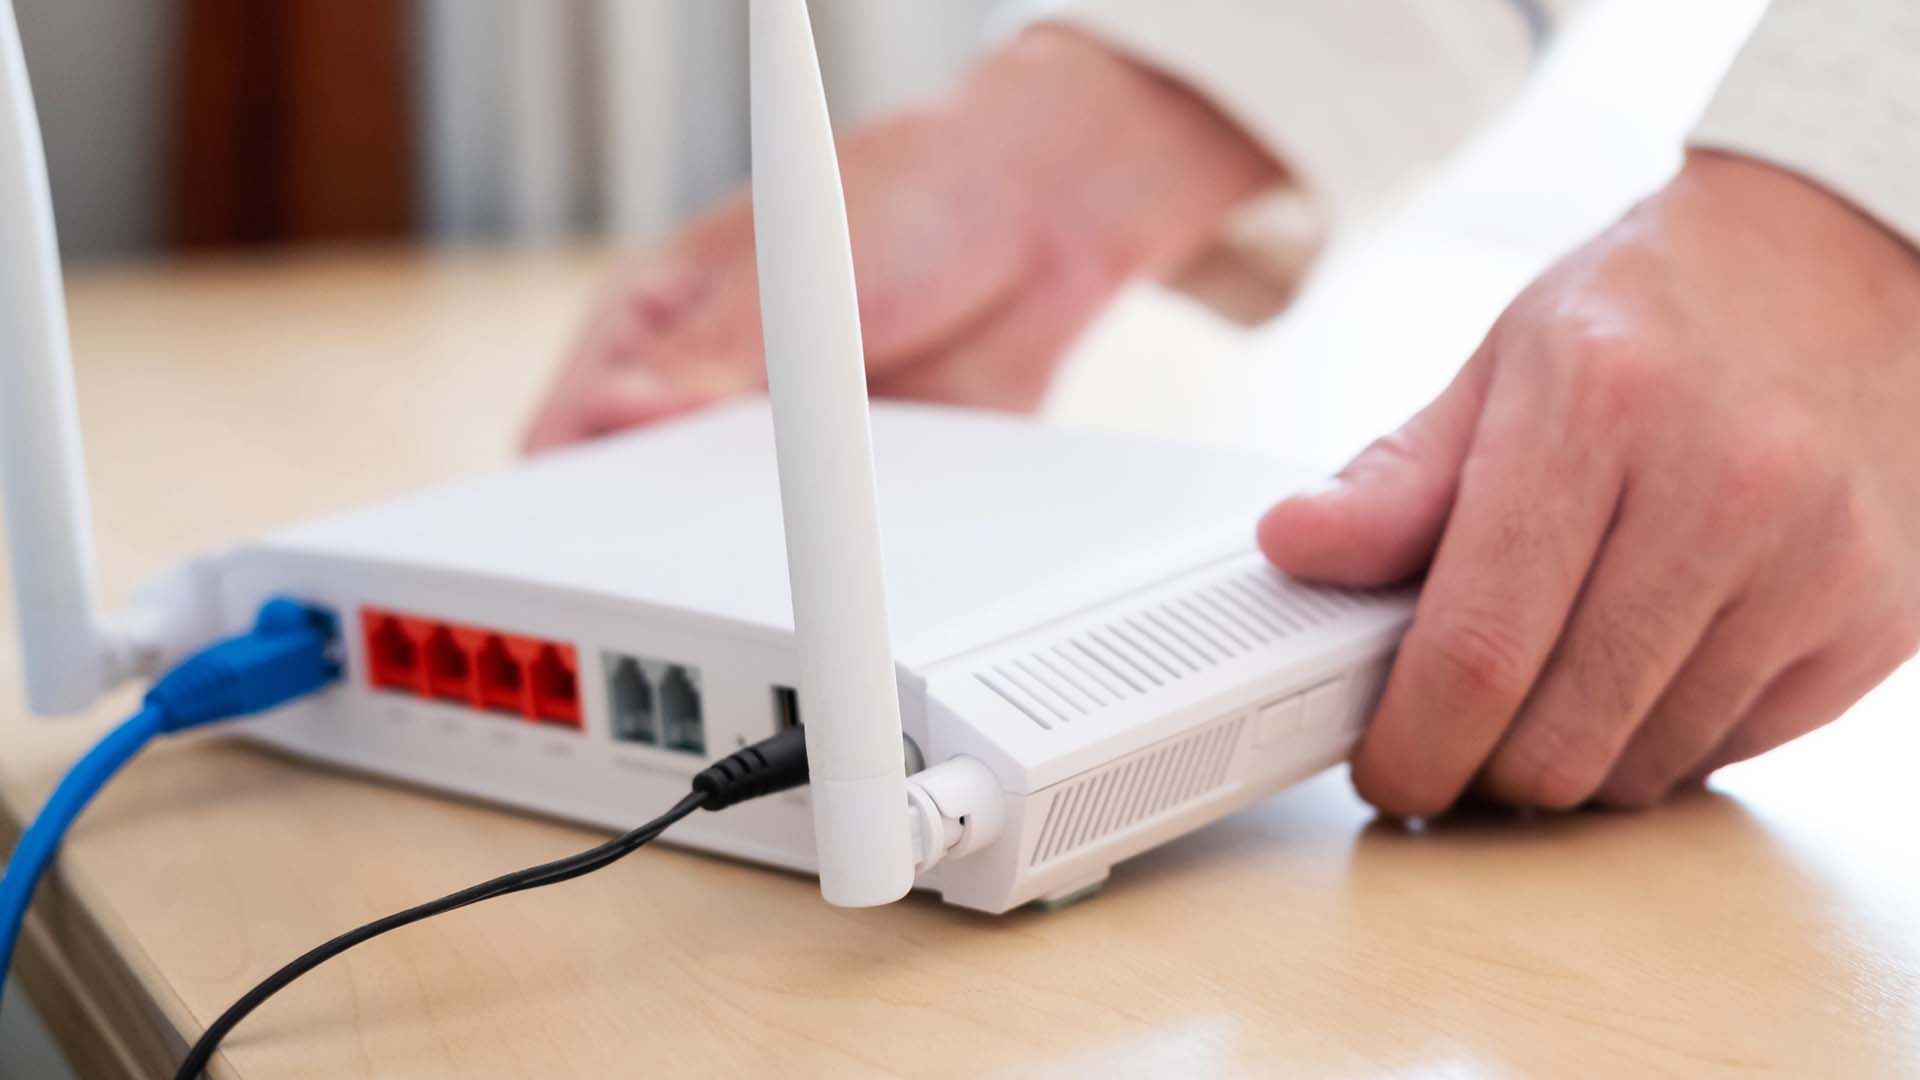 Turn off wifi at night? This is how much electricity you'll save